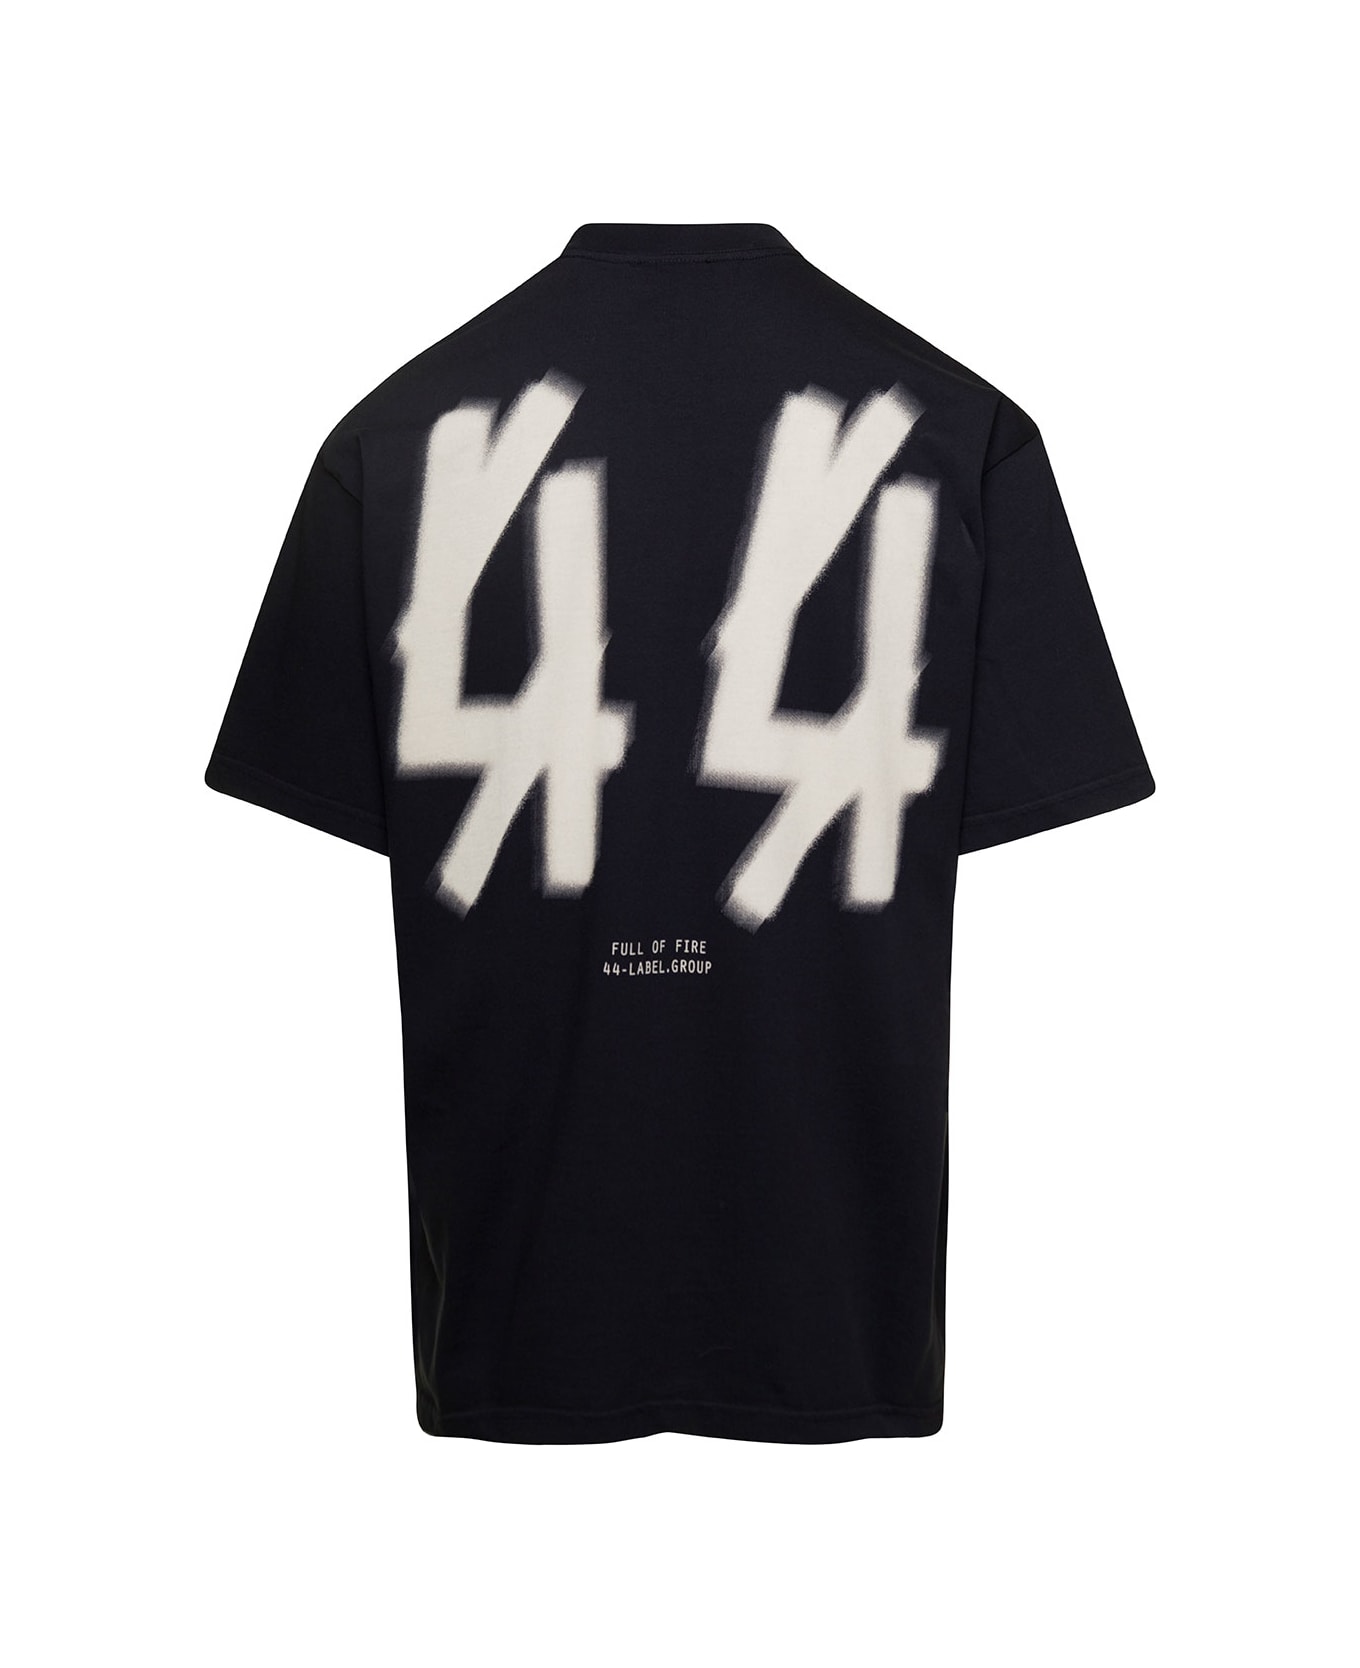 44 Label Group Black T-shirt With Logo Printed On Front And Back In Cotton Man シャツ